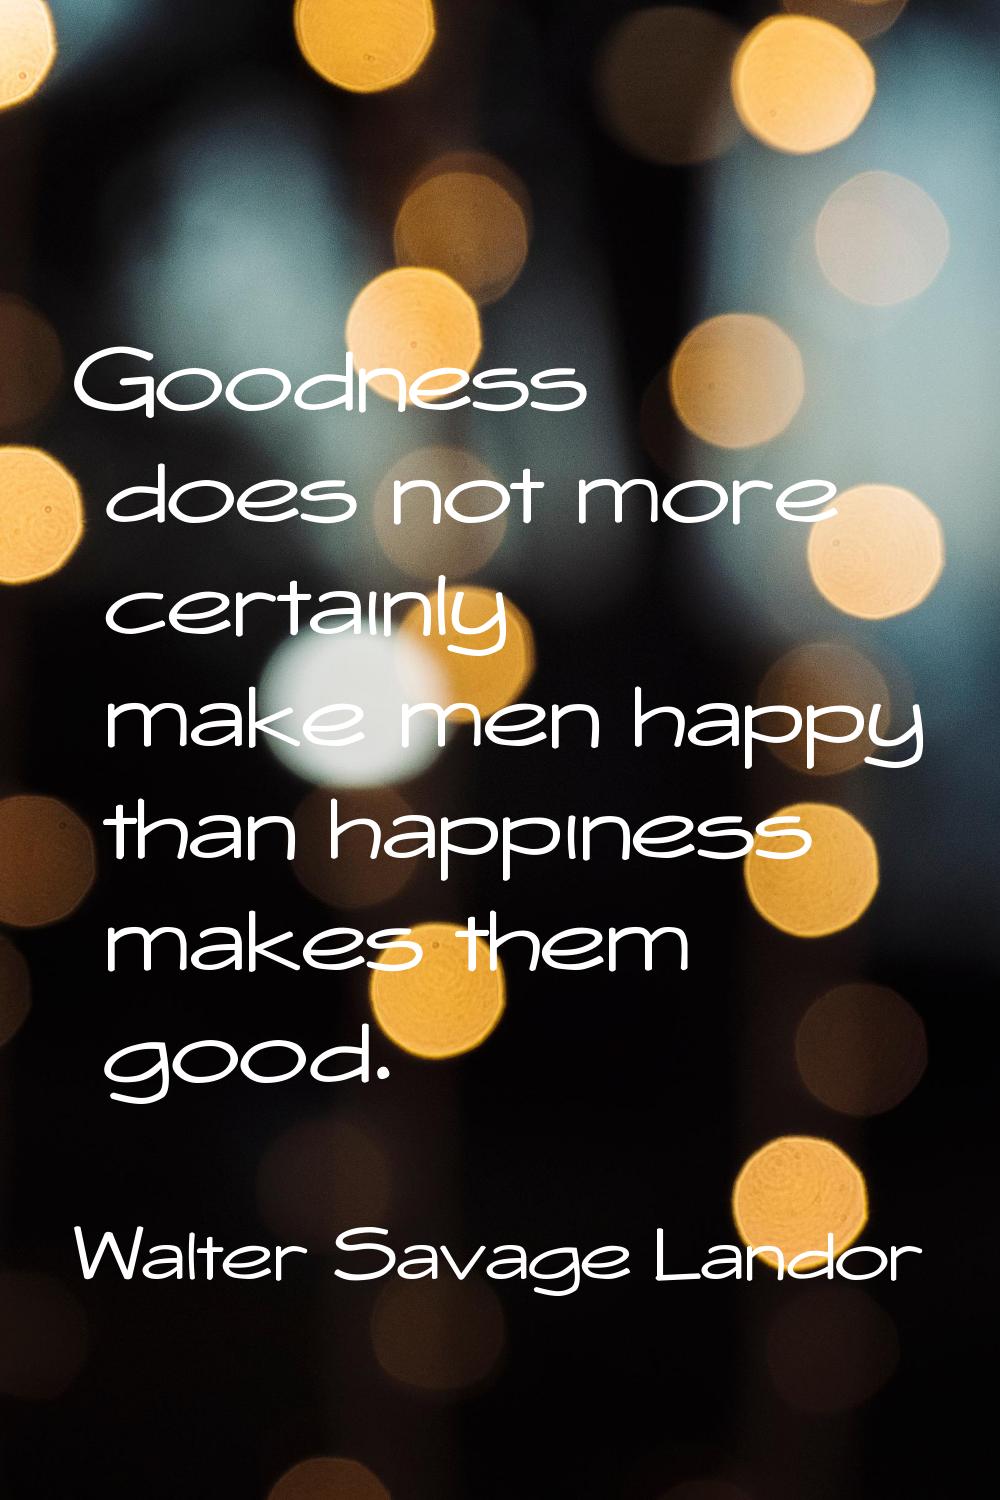 Goodness does not more certainly make men happy than happiness makes them good.